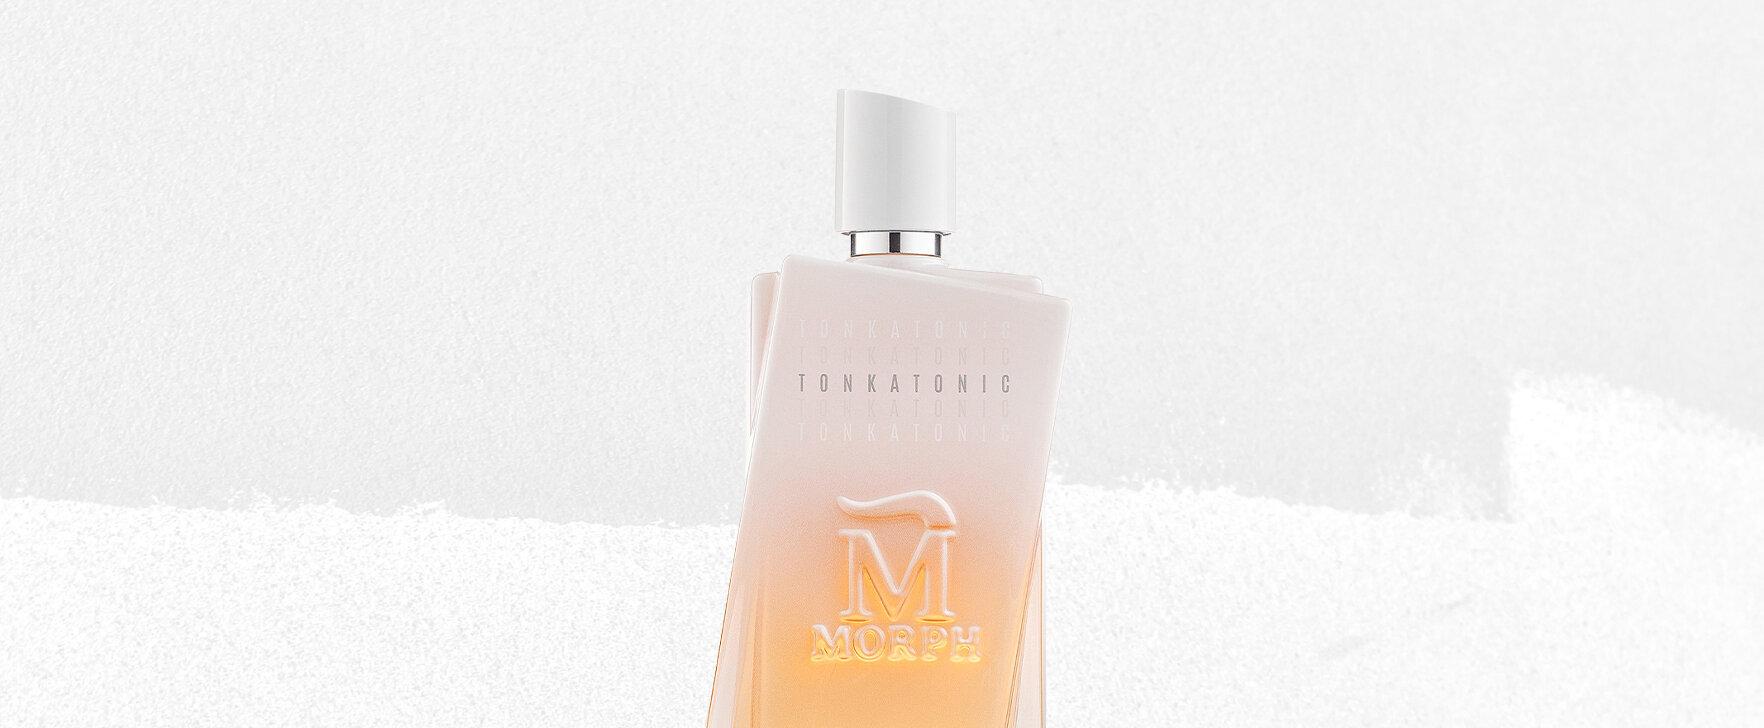 A Touch of Bold Elegance: The New "Tonkatonic" Eau de Parfum From Morph